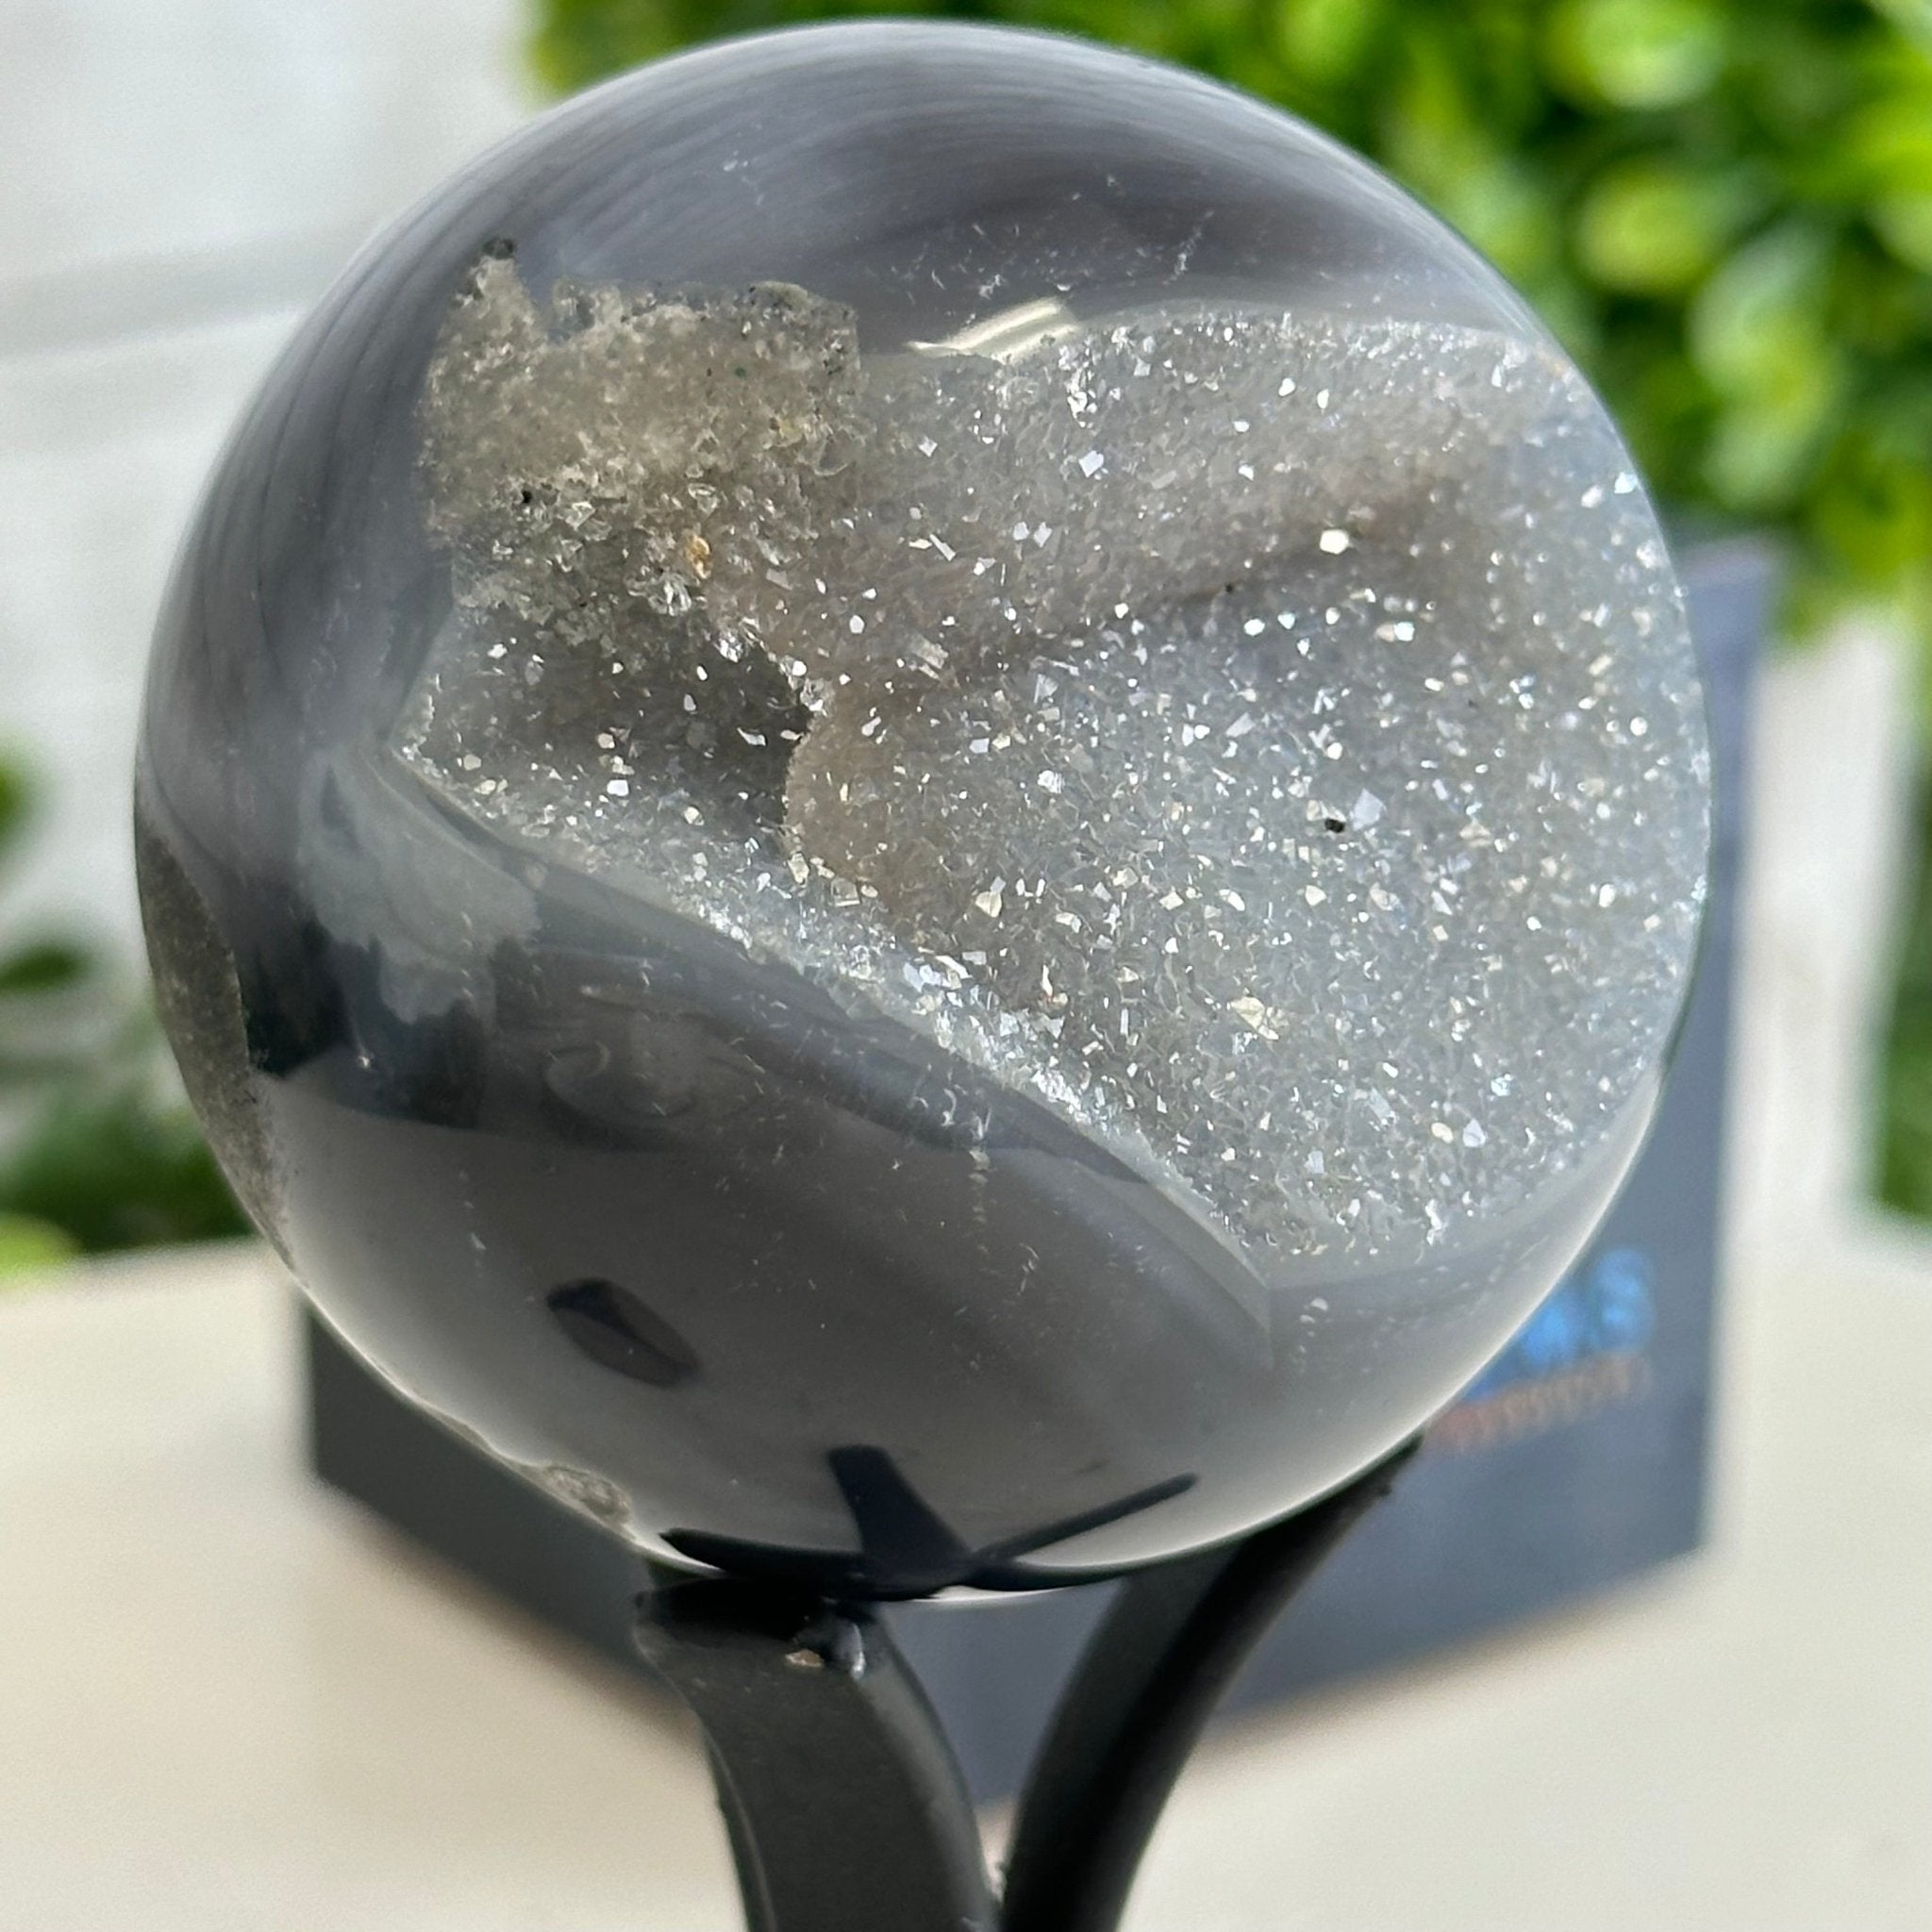 Druzy Agate Sphere on a Metal Stand, 0.5 lbs & 4.7" Tall #5634-0001 - Brazil GemsBrazil GemsDruzy Agate Sphere on a Metal Stand, 0.5 lbs & 4.7" Tall #5634-0001Spheres5634-0001